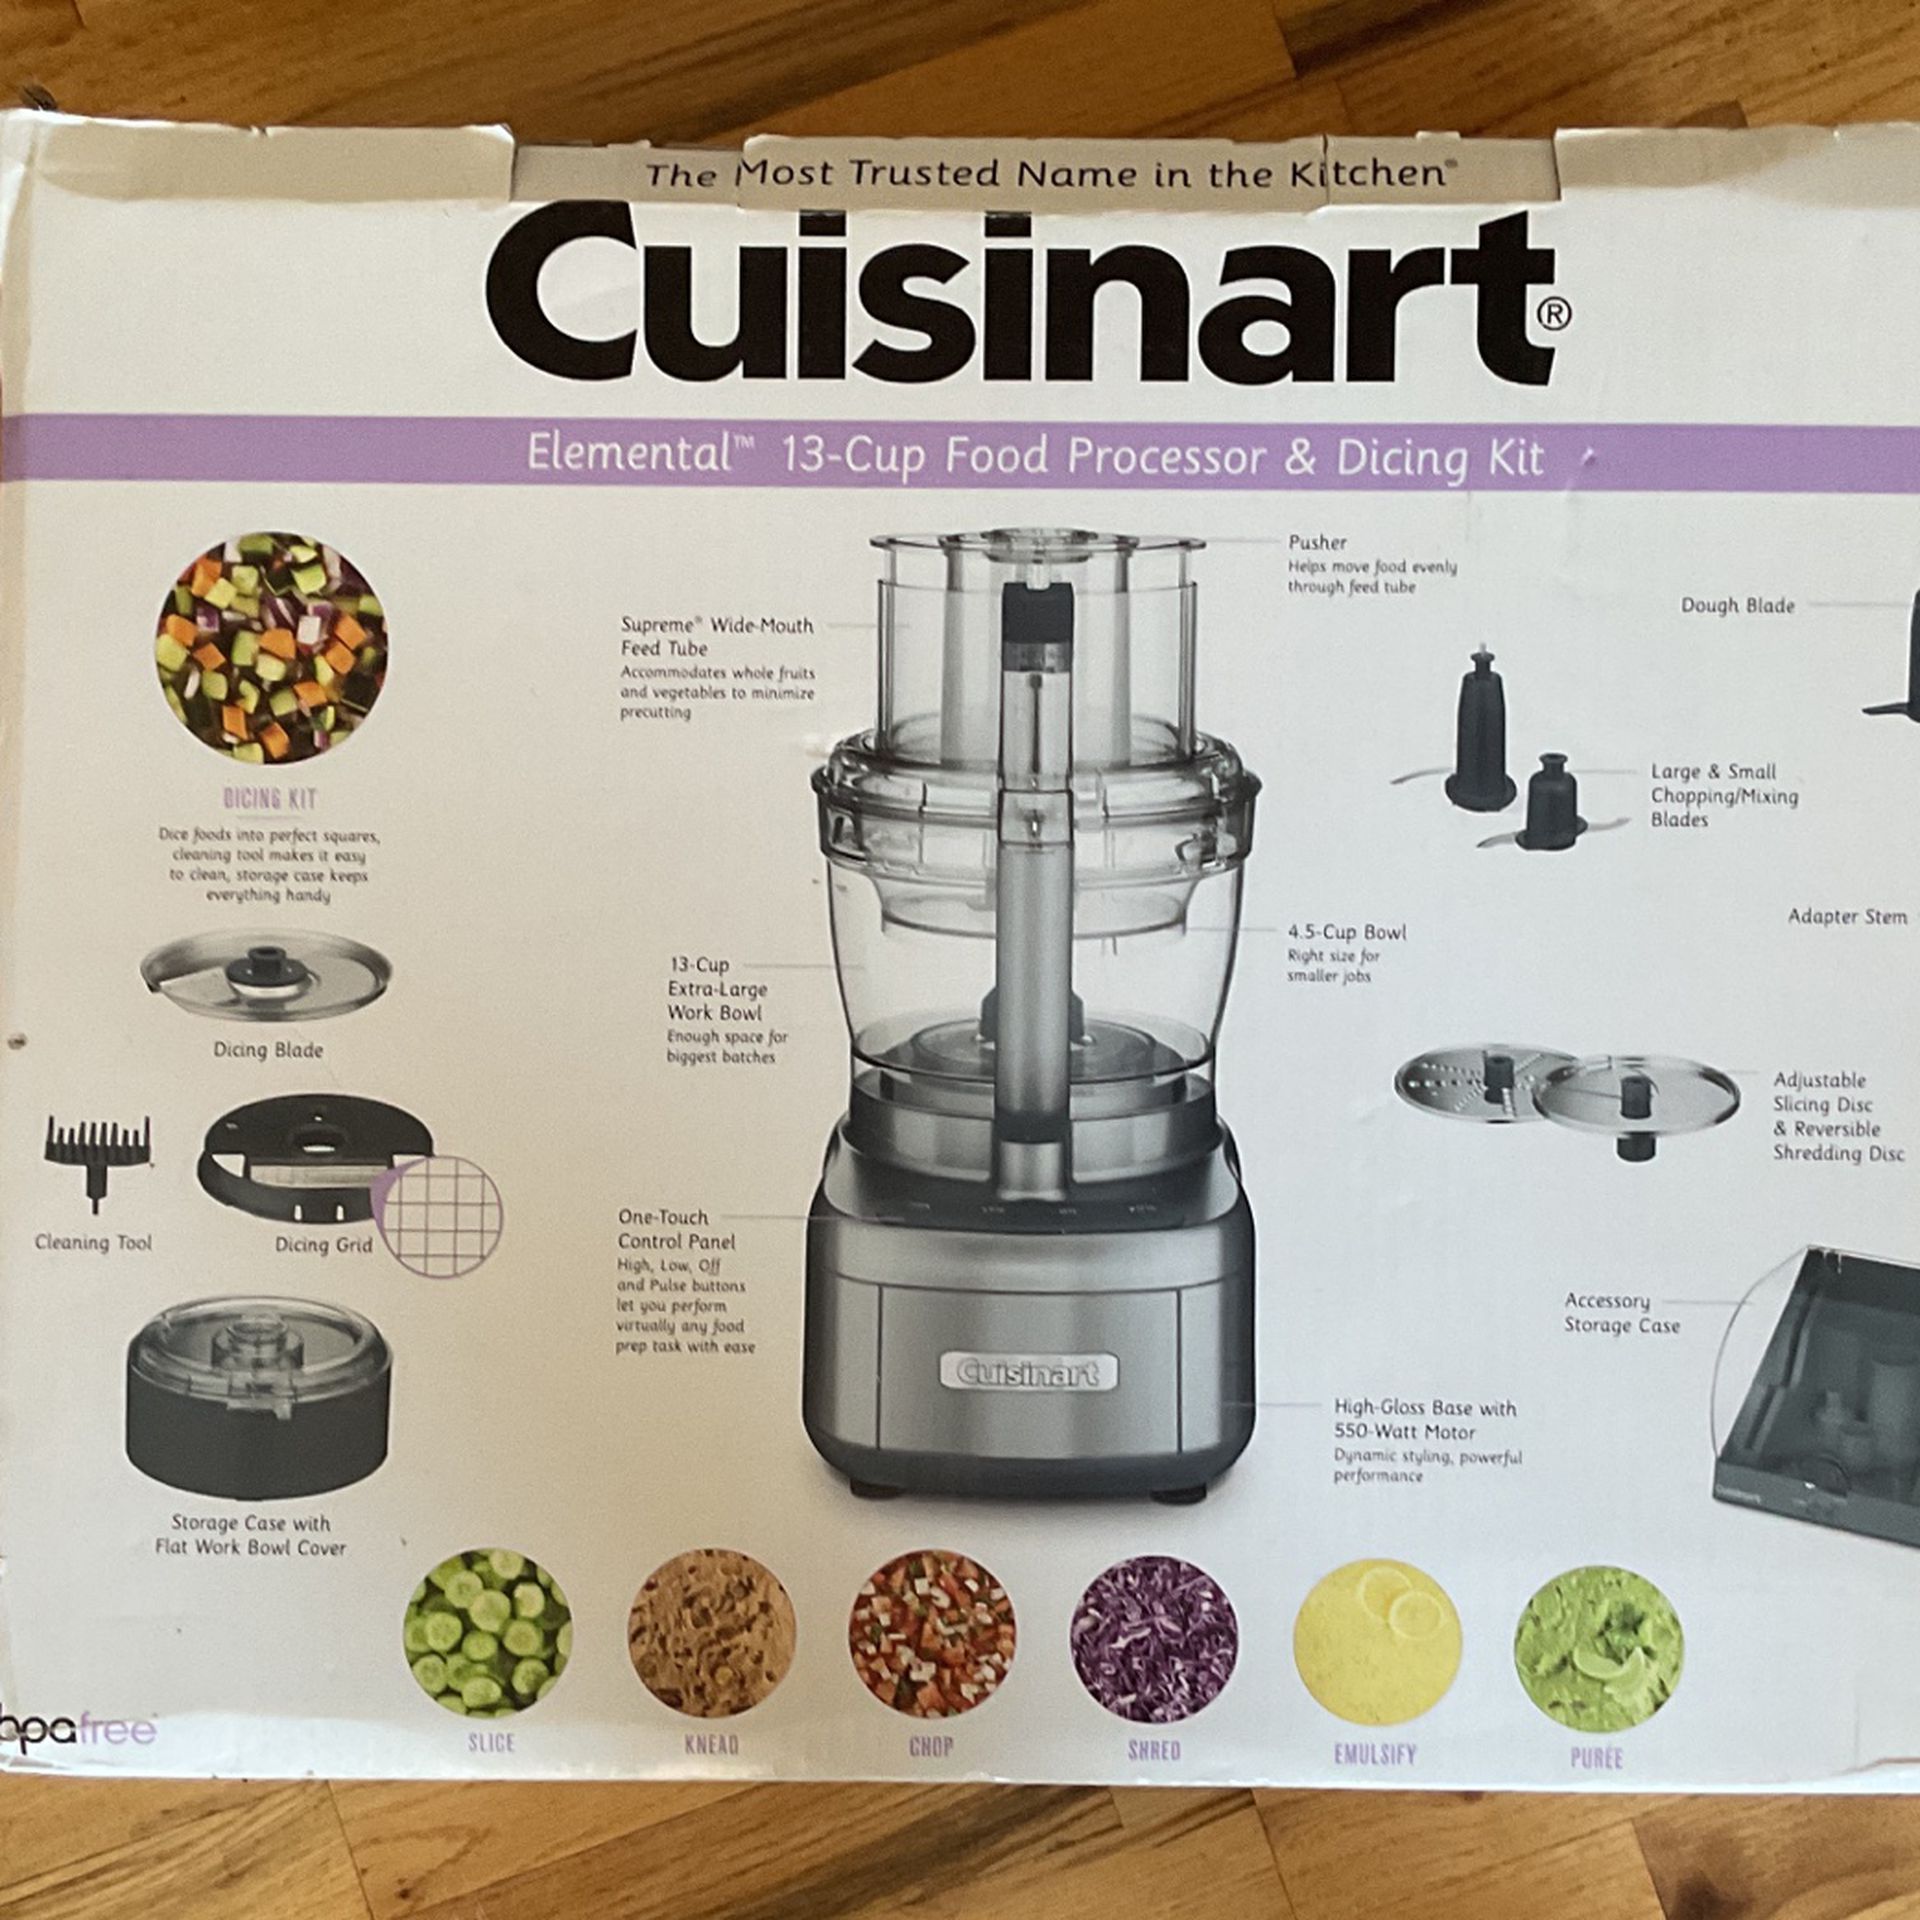 Cuisinart Prep 11 Plus 11 Cup Food Processor for Sale in Roslyn Heights, NY  - OfferUp